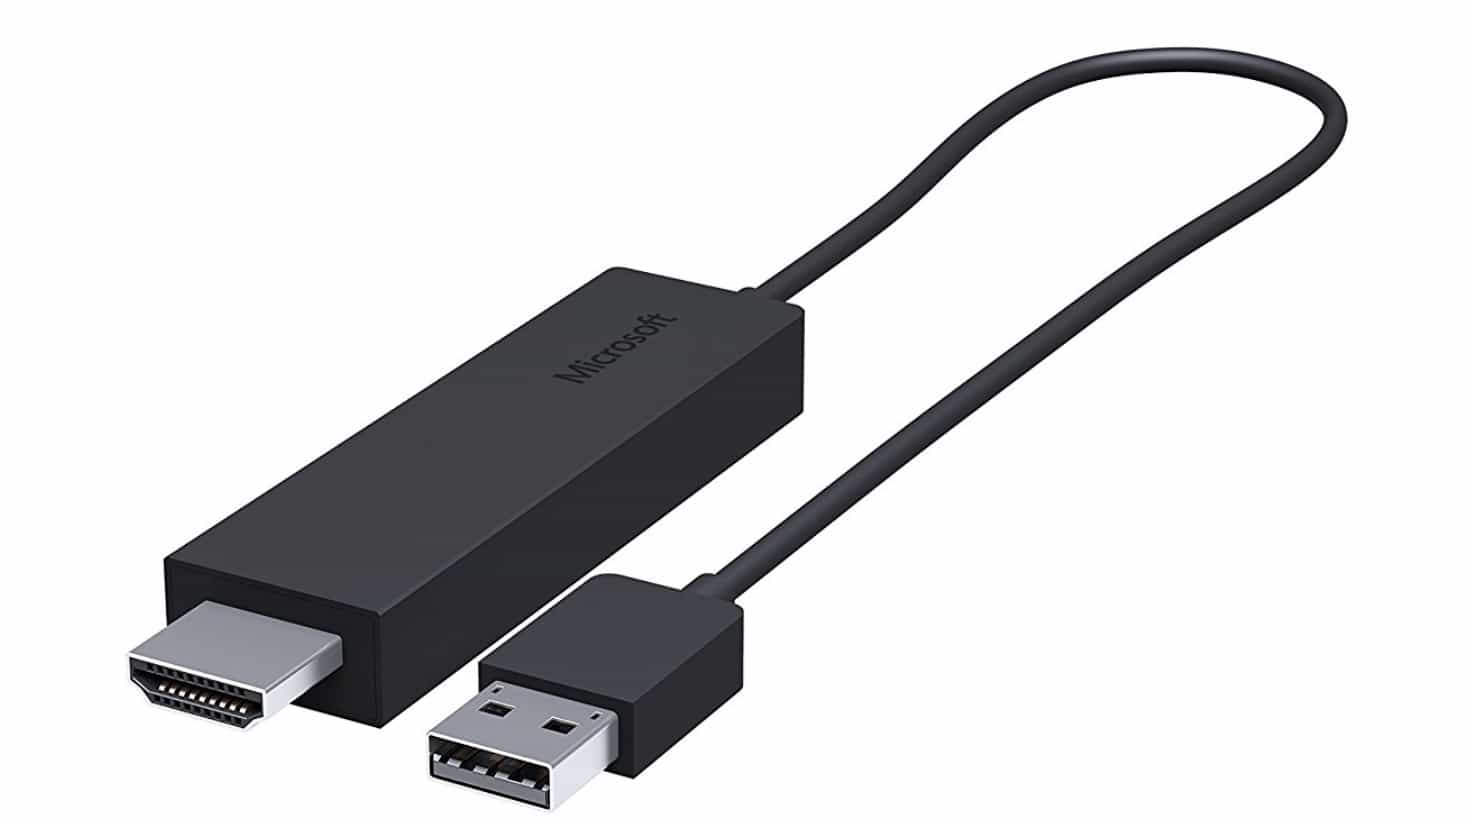 wireless display adapter windows 10 not showing in connectd devices